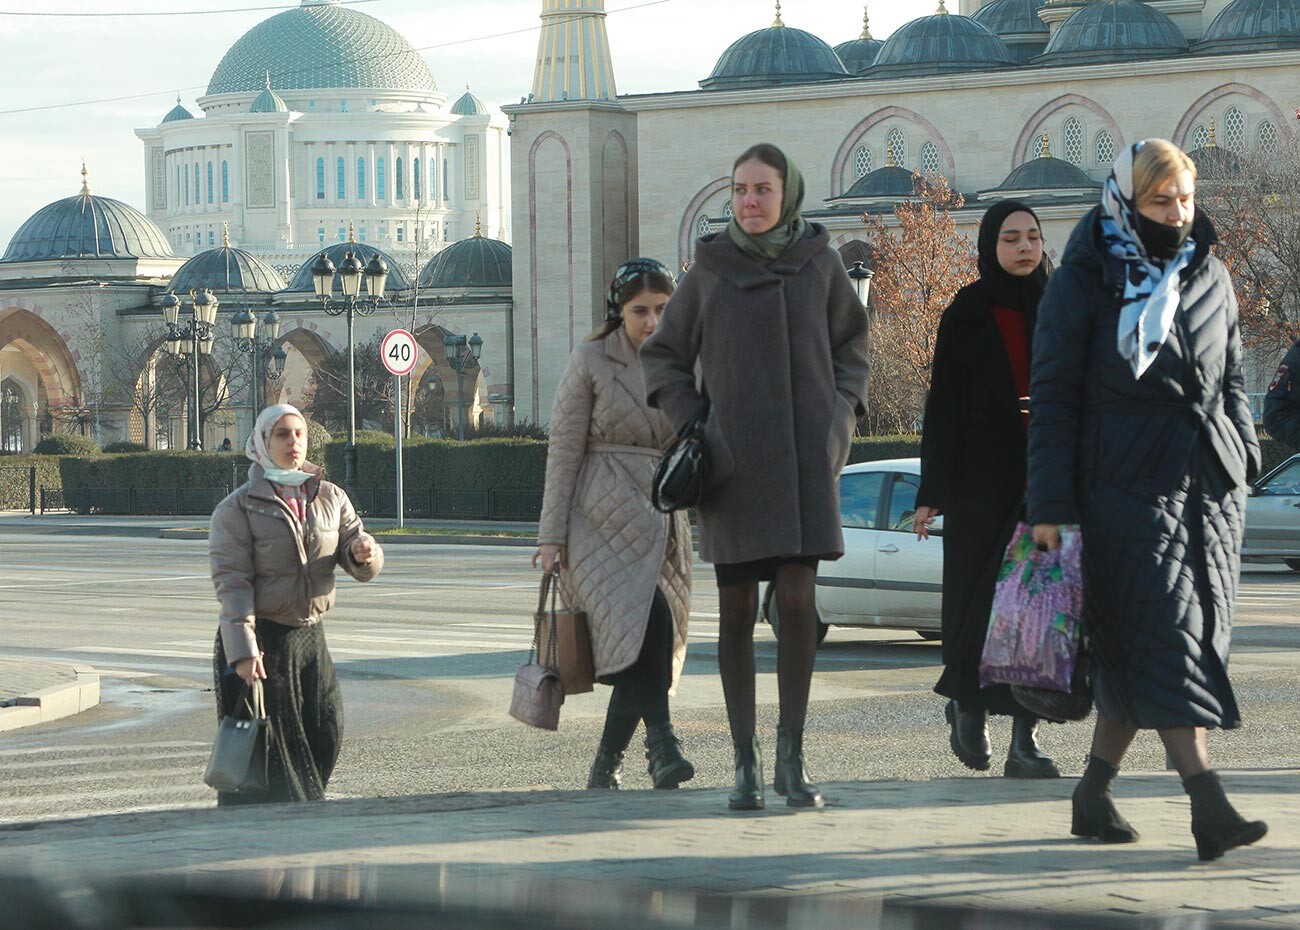 In the streets of Grozny